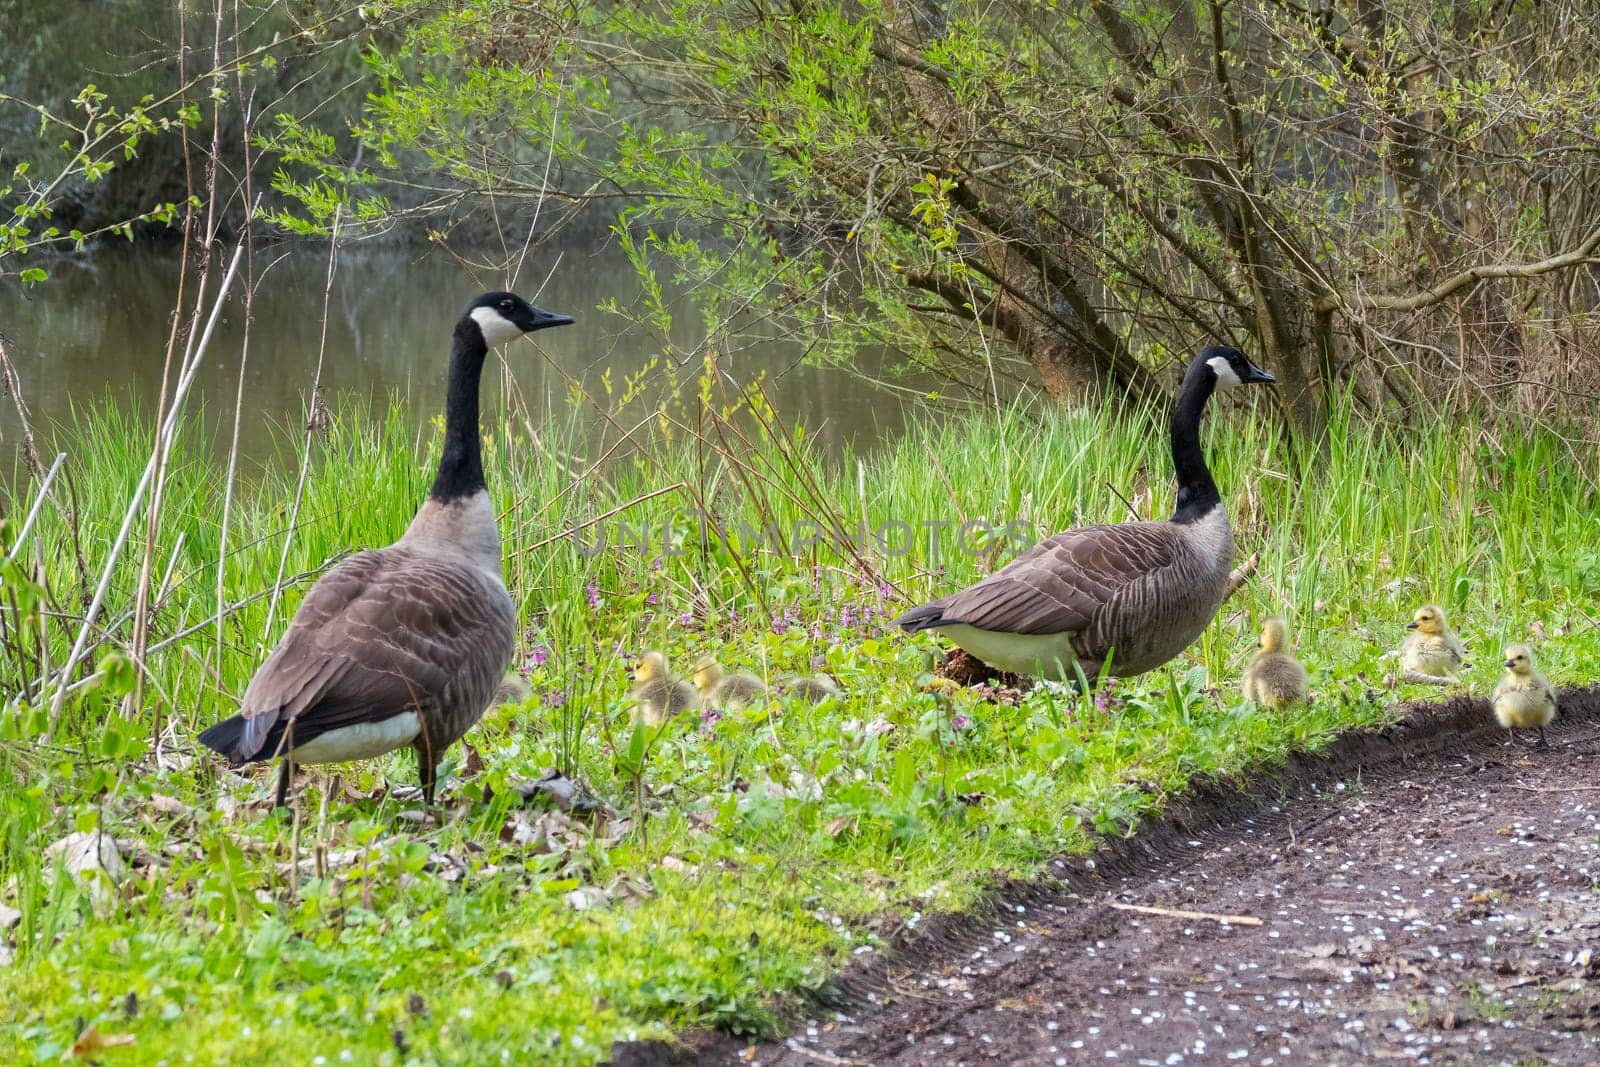 the Branta canadensis or big canadian goose by compuinfoto